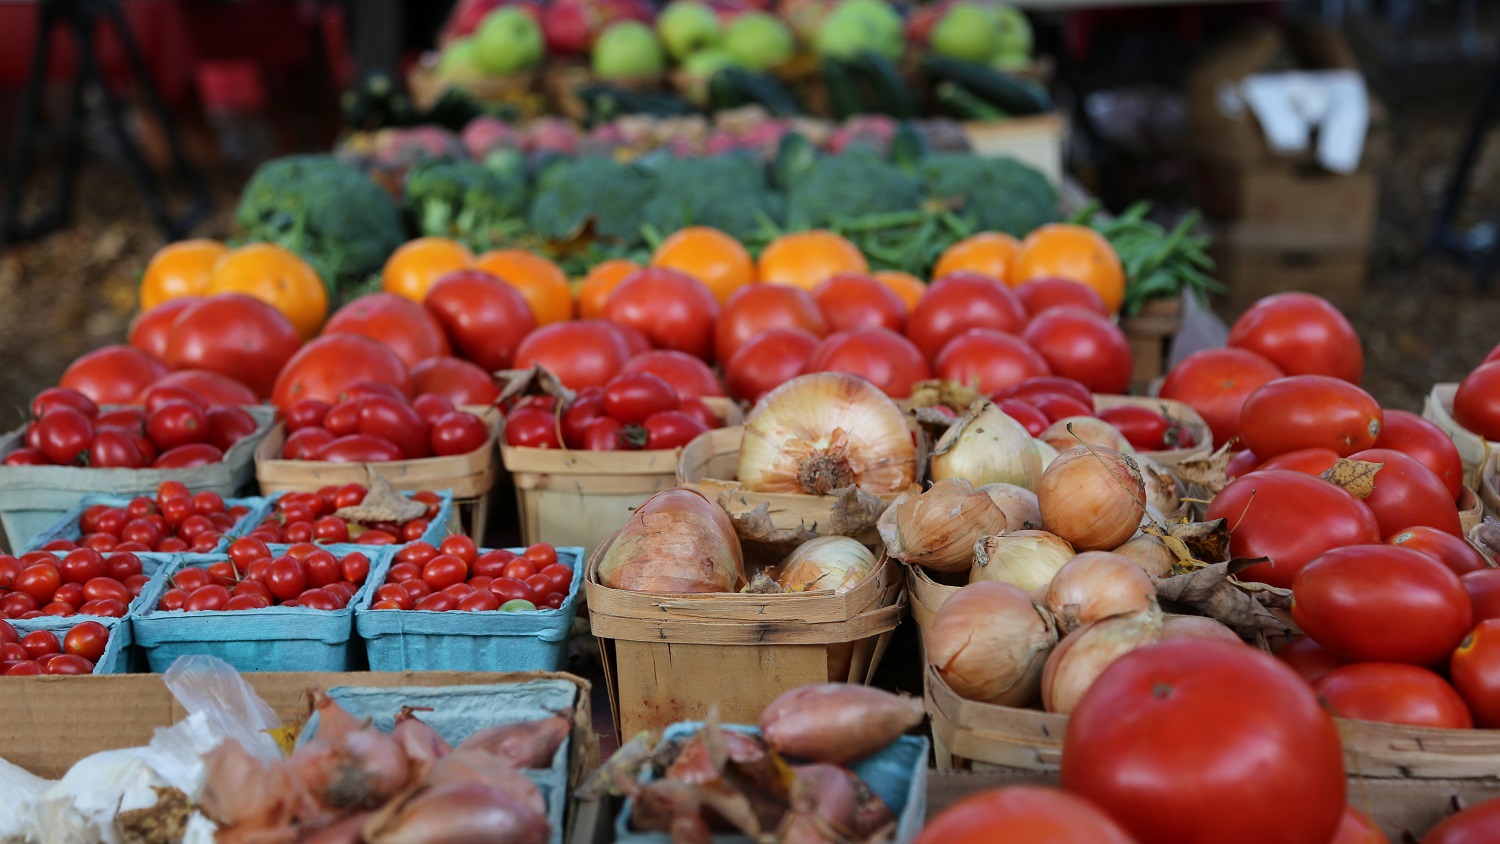 Fresh Vegetables - NC State Extension Expands Delivery of Local Produce to Coastal Tourists - Parks, Recreation and Tourism Management at NC State University